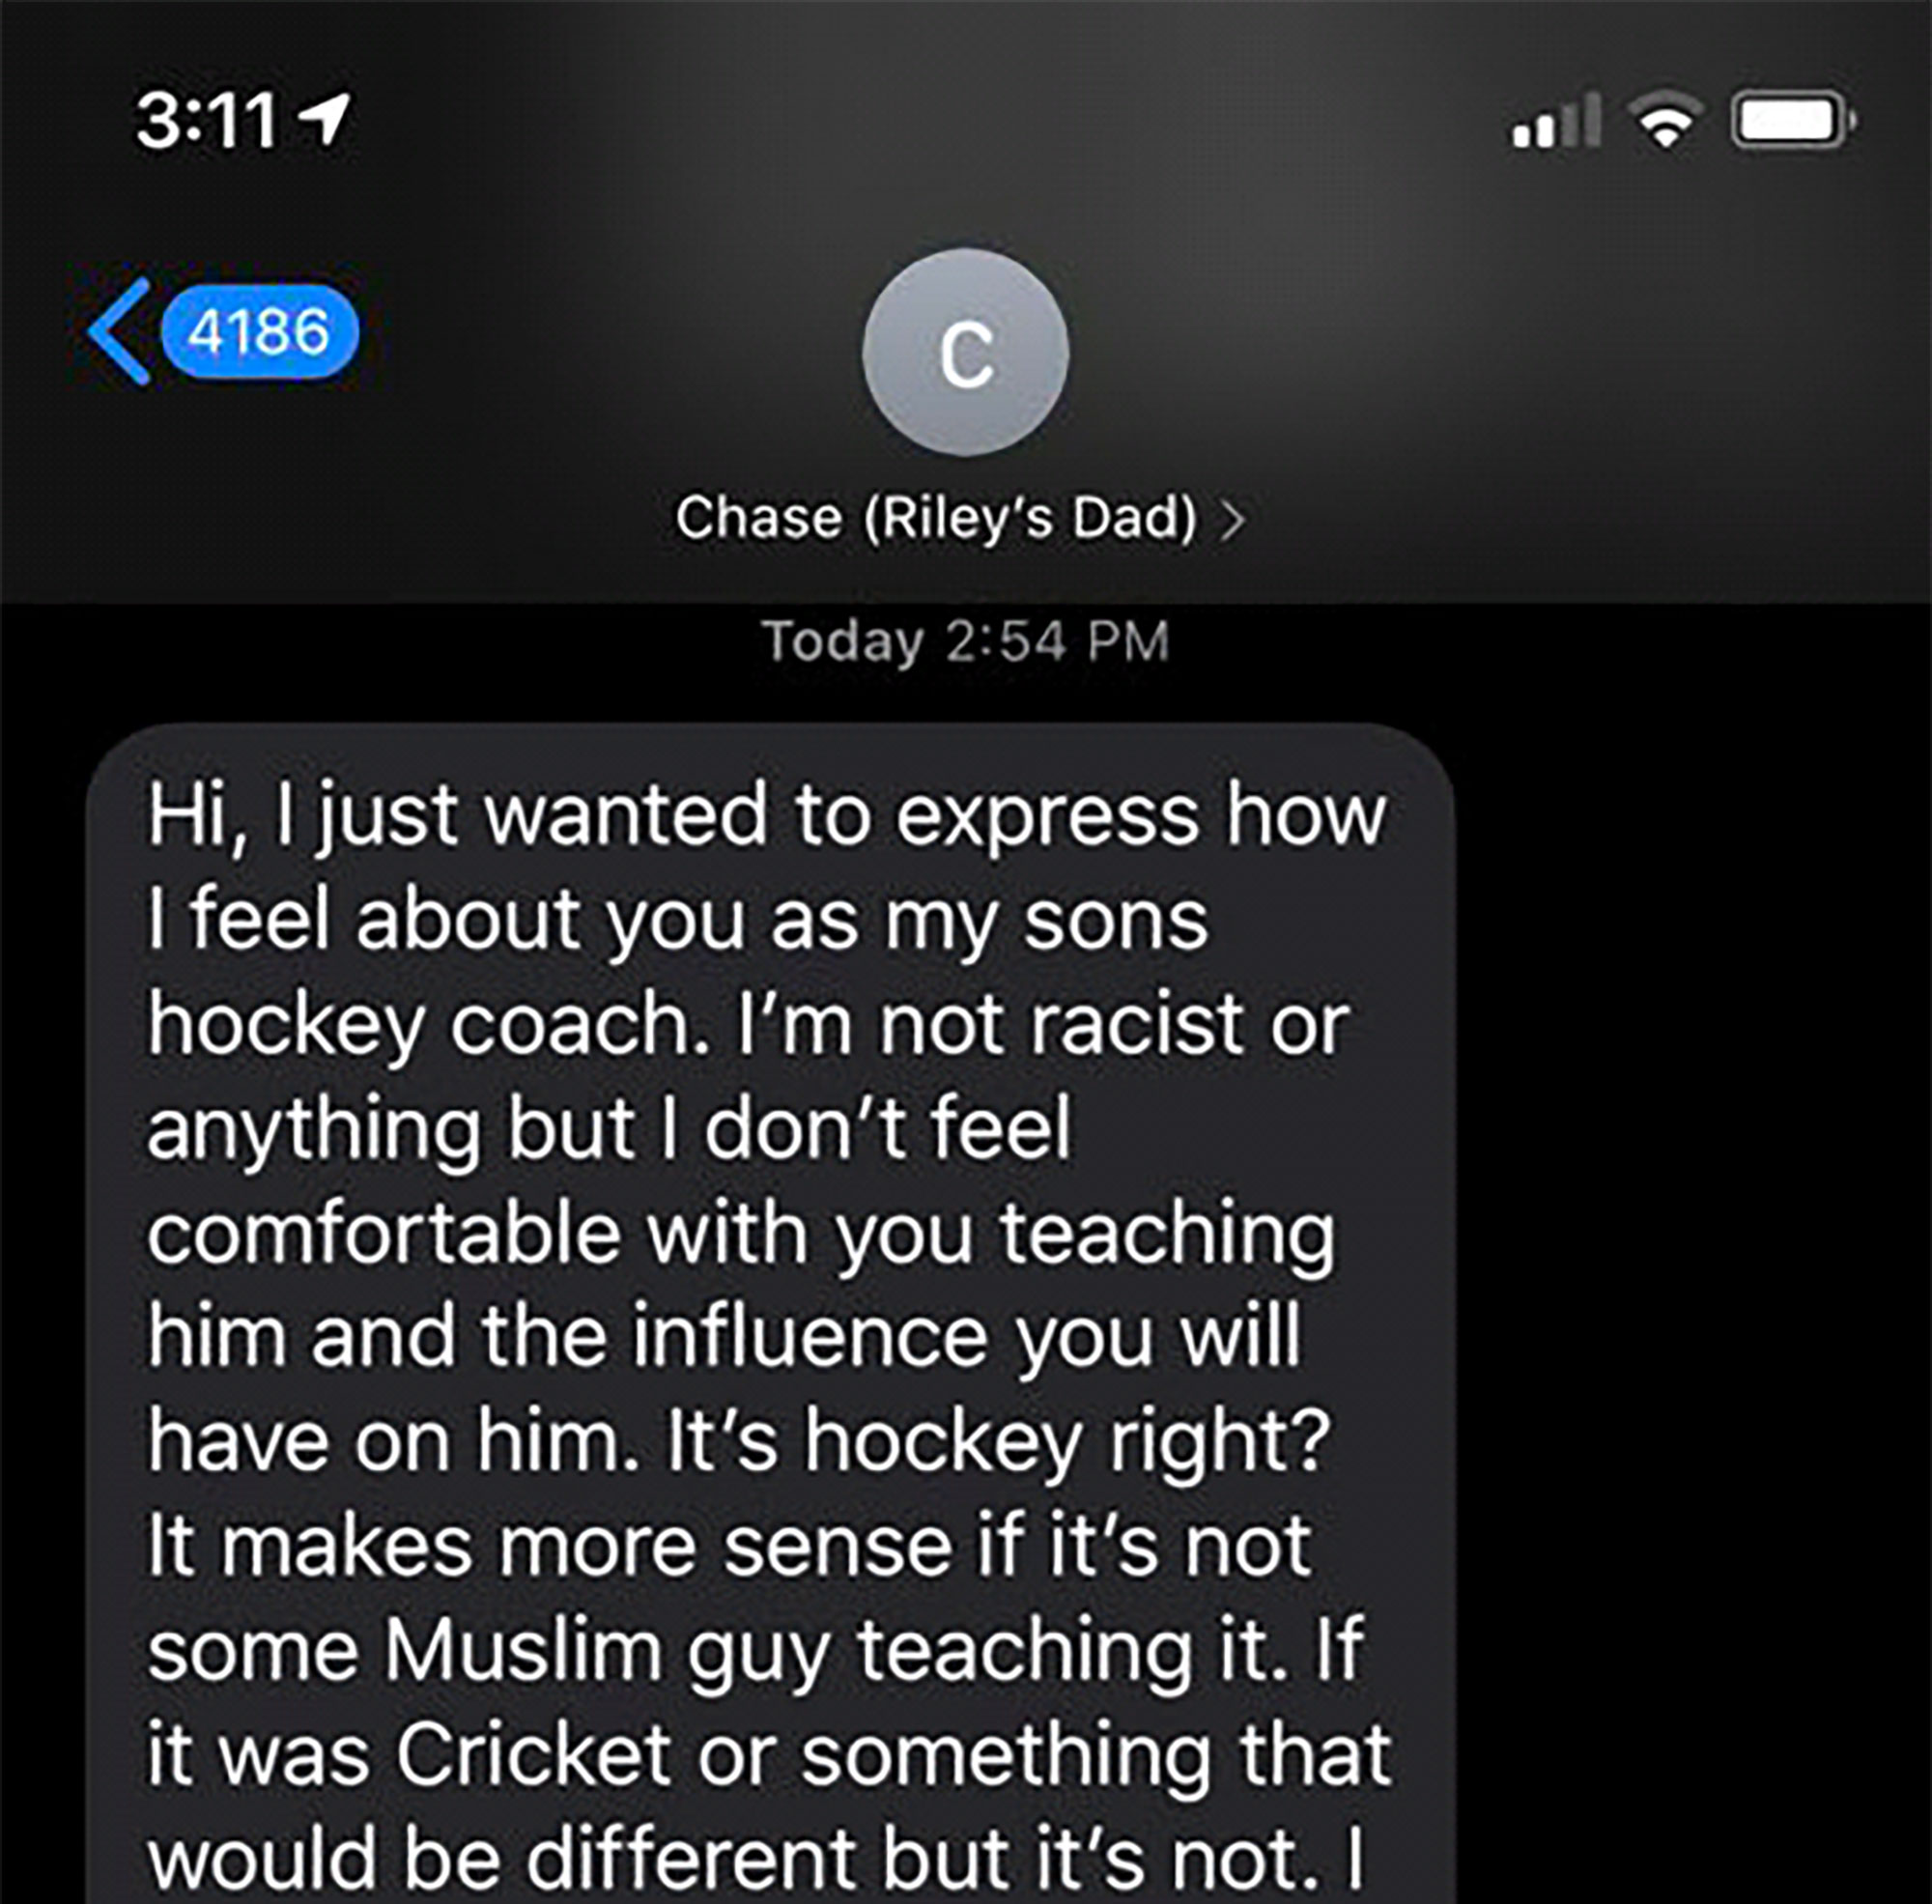 business quotes - 4186 Chase Riley's Dad > Today Hi, I just wanted to express how I feel about you as my sons hockey coach. I'm not racist or anything but I don't feel comfortable with you teaching him and the influence you will have on him. It's hockey r